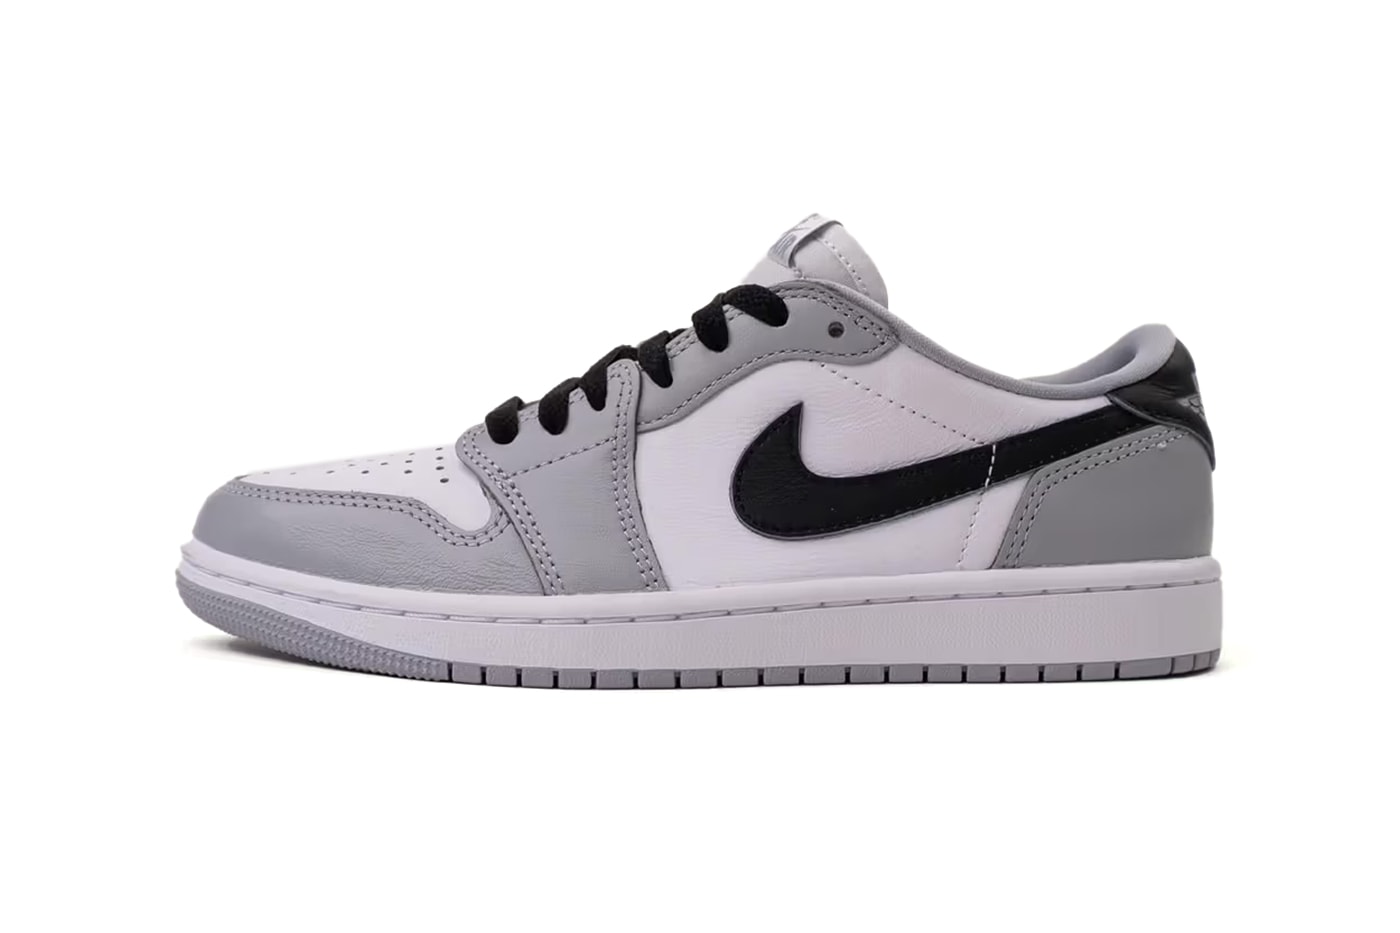 Air Jordan 1 Low OG Barons CZ0790-110 Release Date info store list buying guide photos price